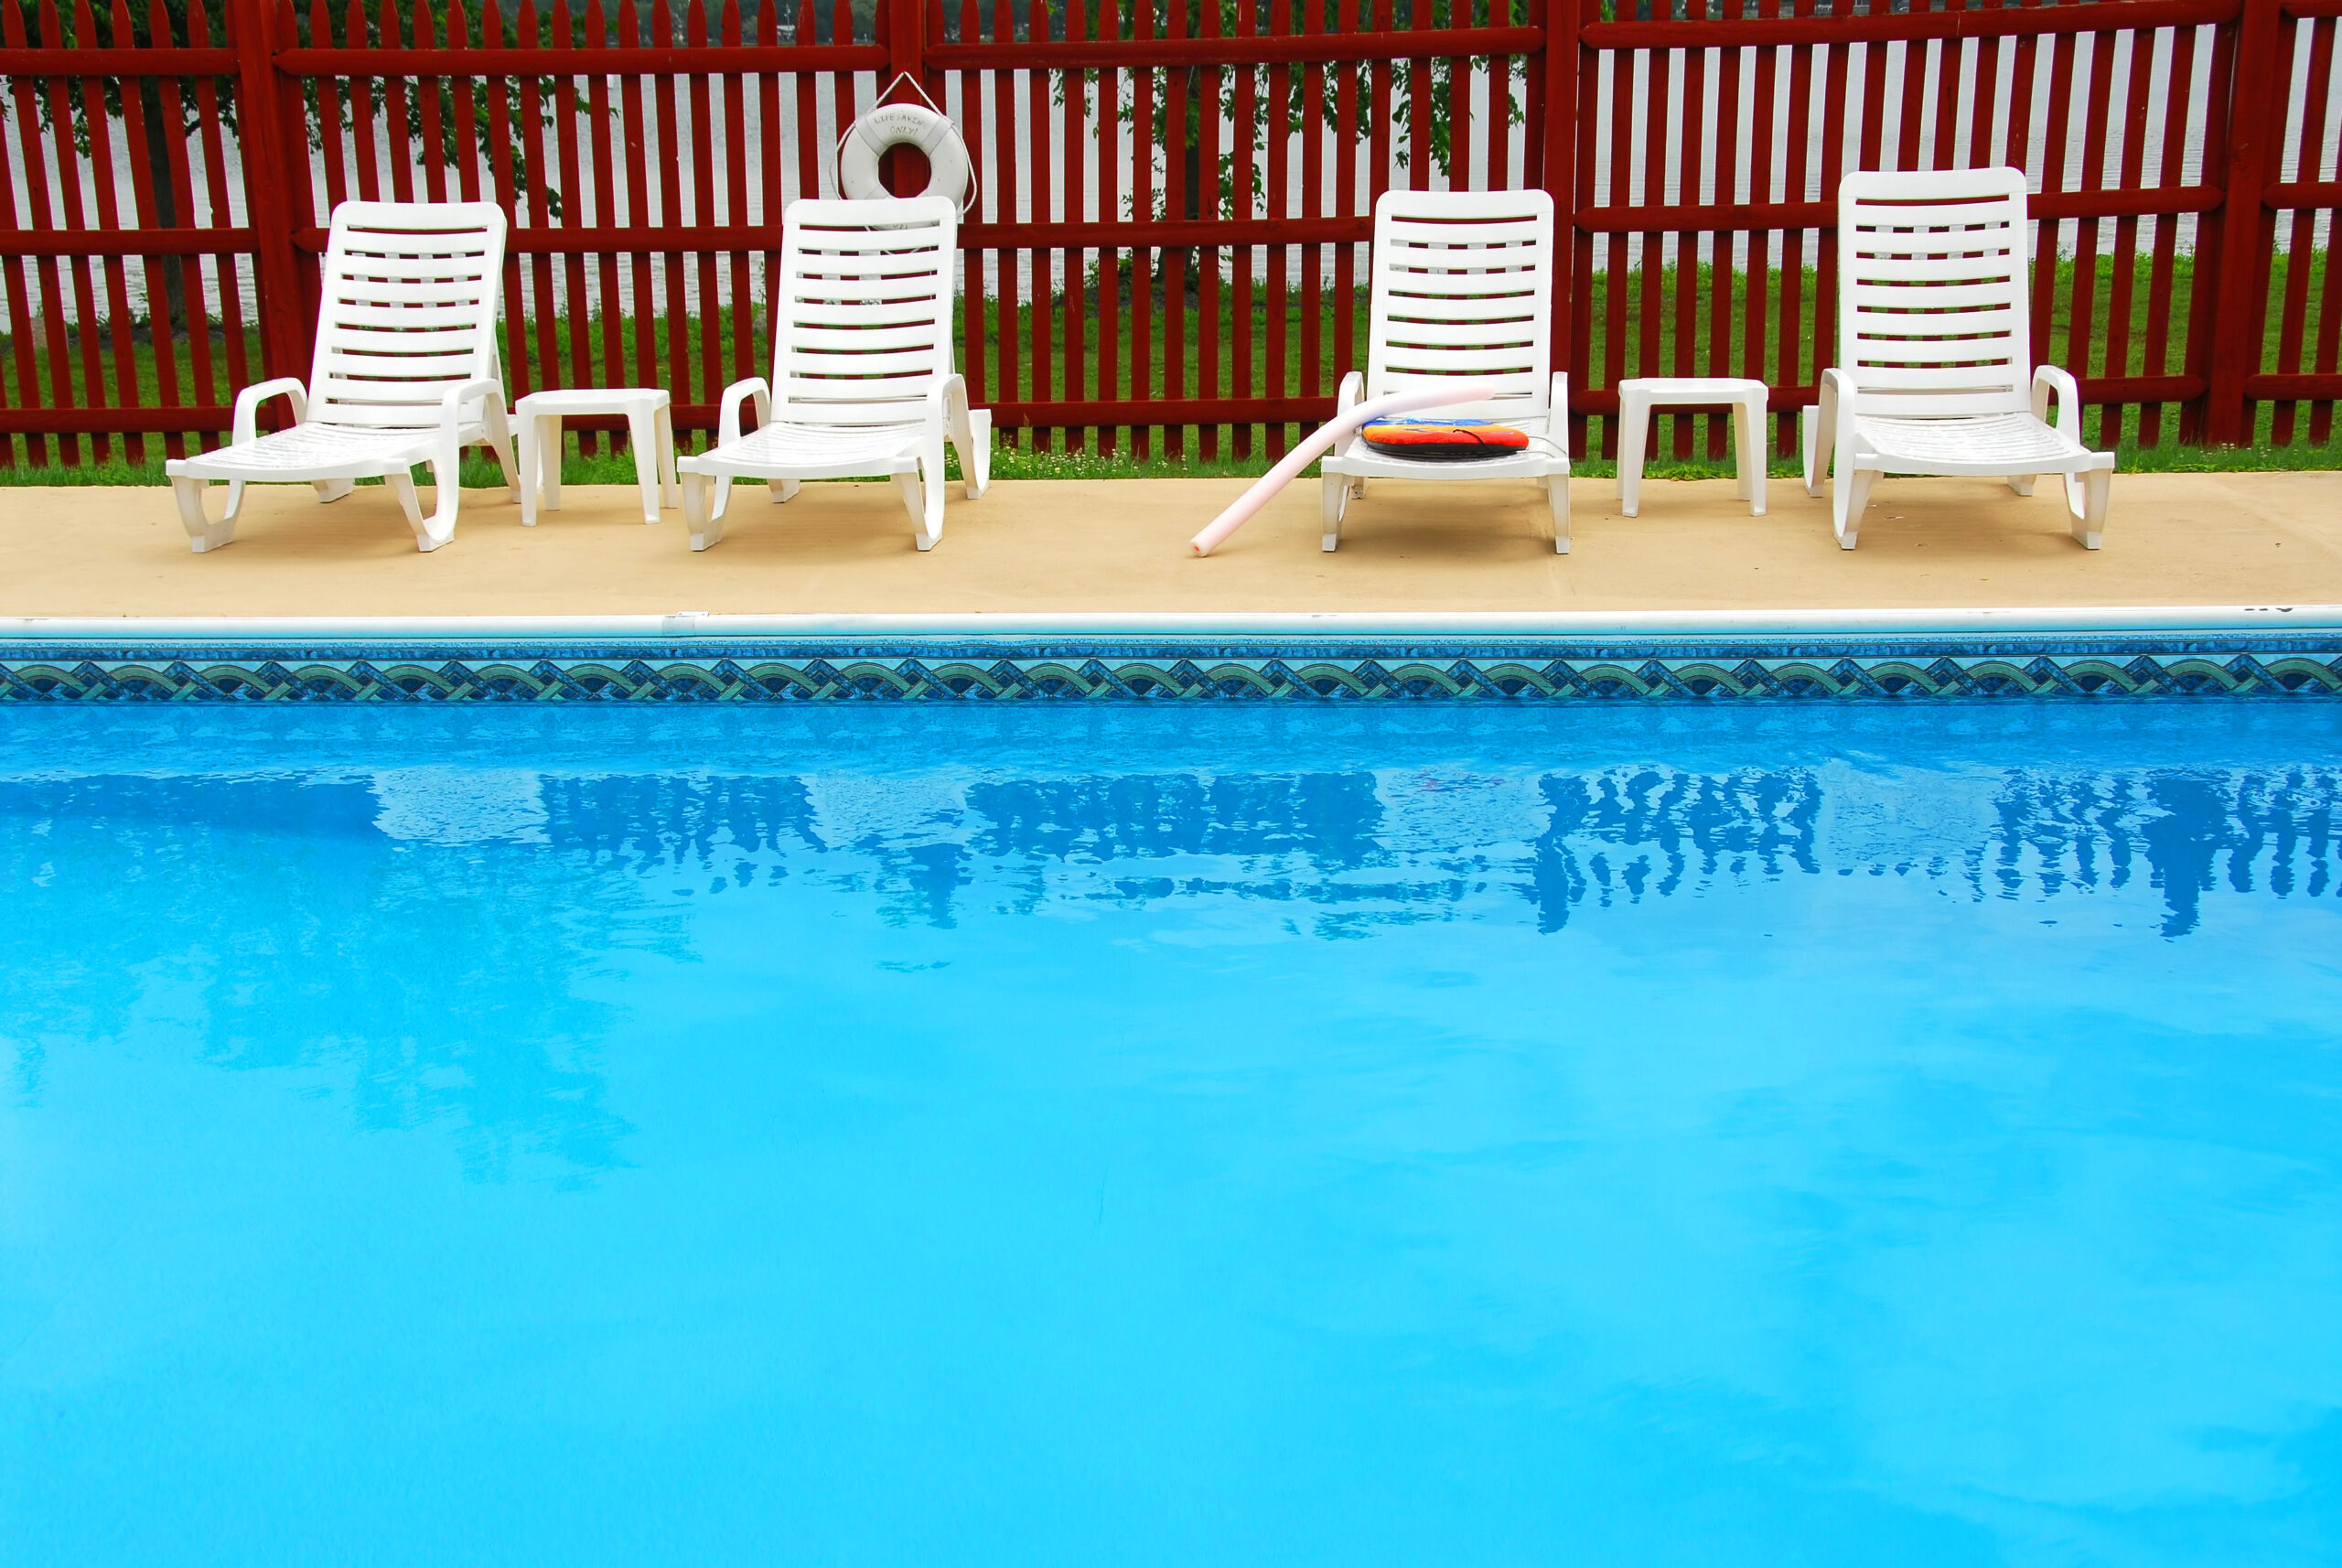 White chairs arranged on the pool deck, providing comfortable seating for poolside relaxation.